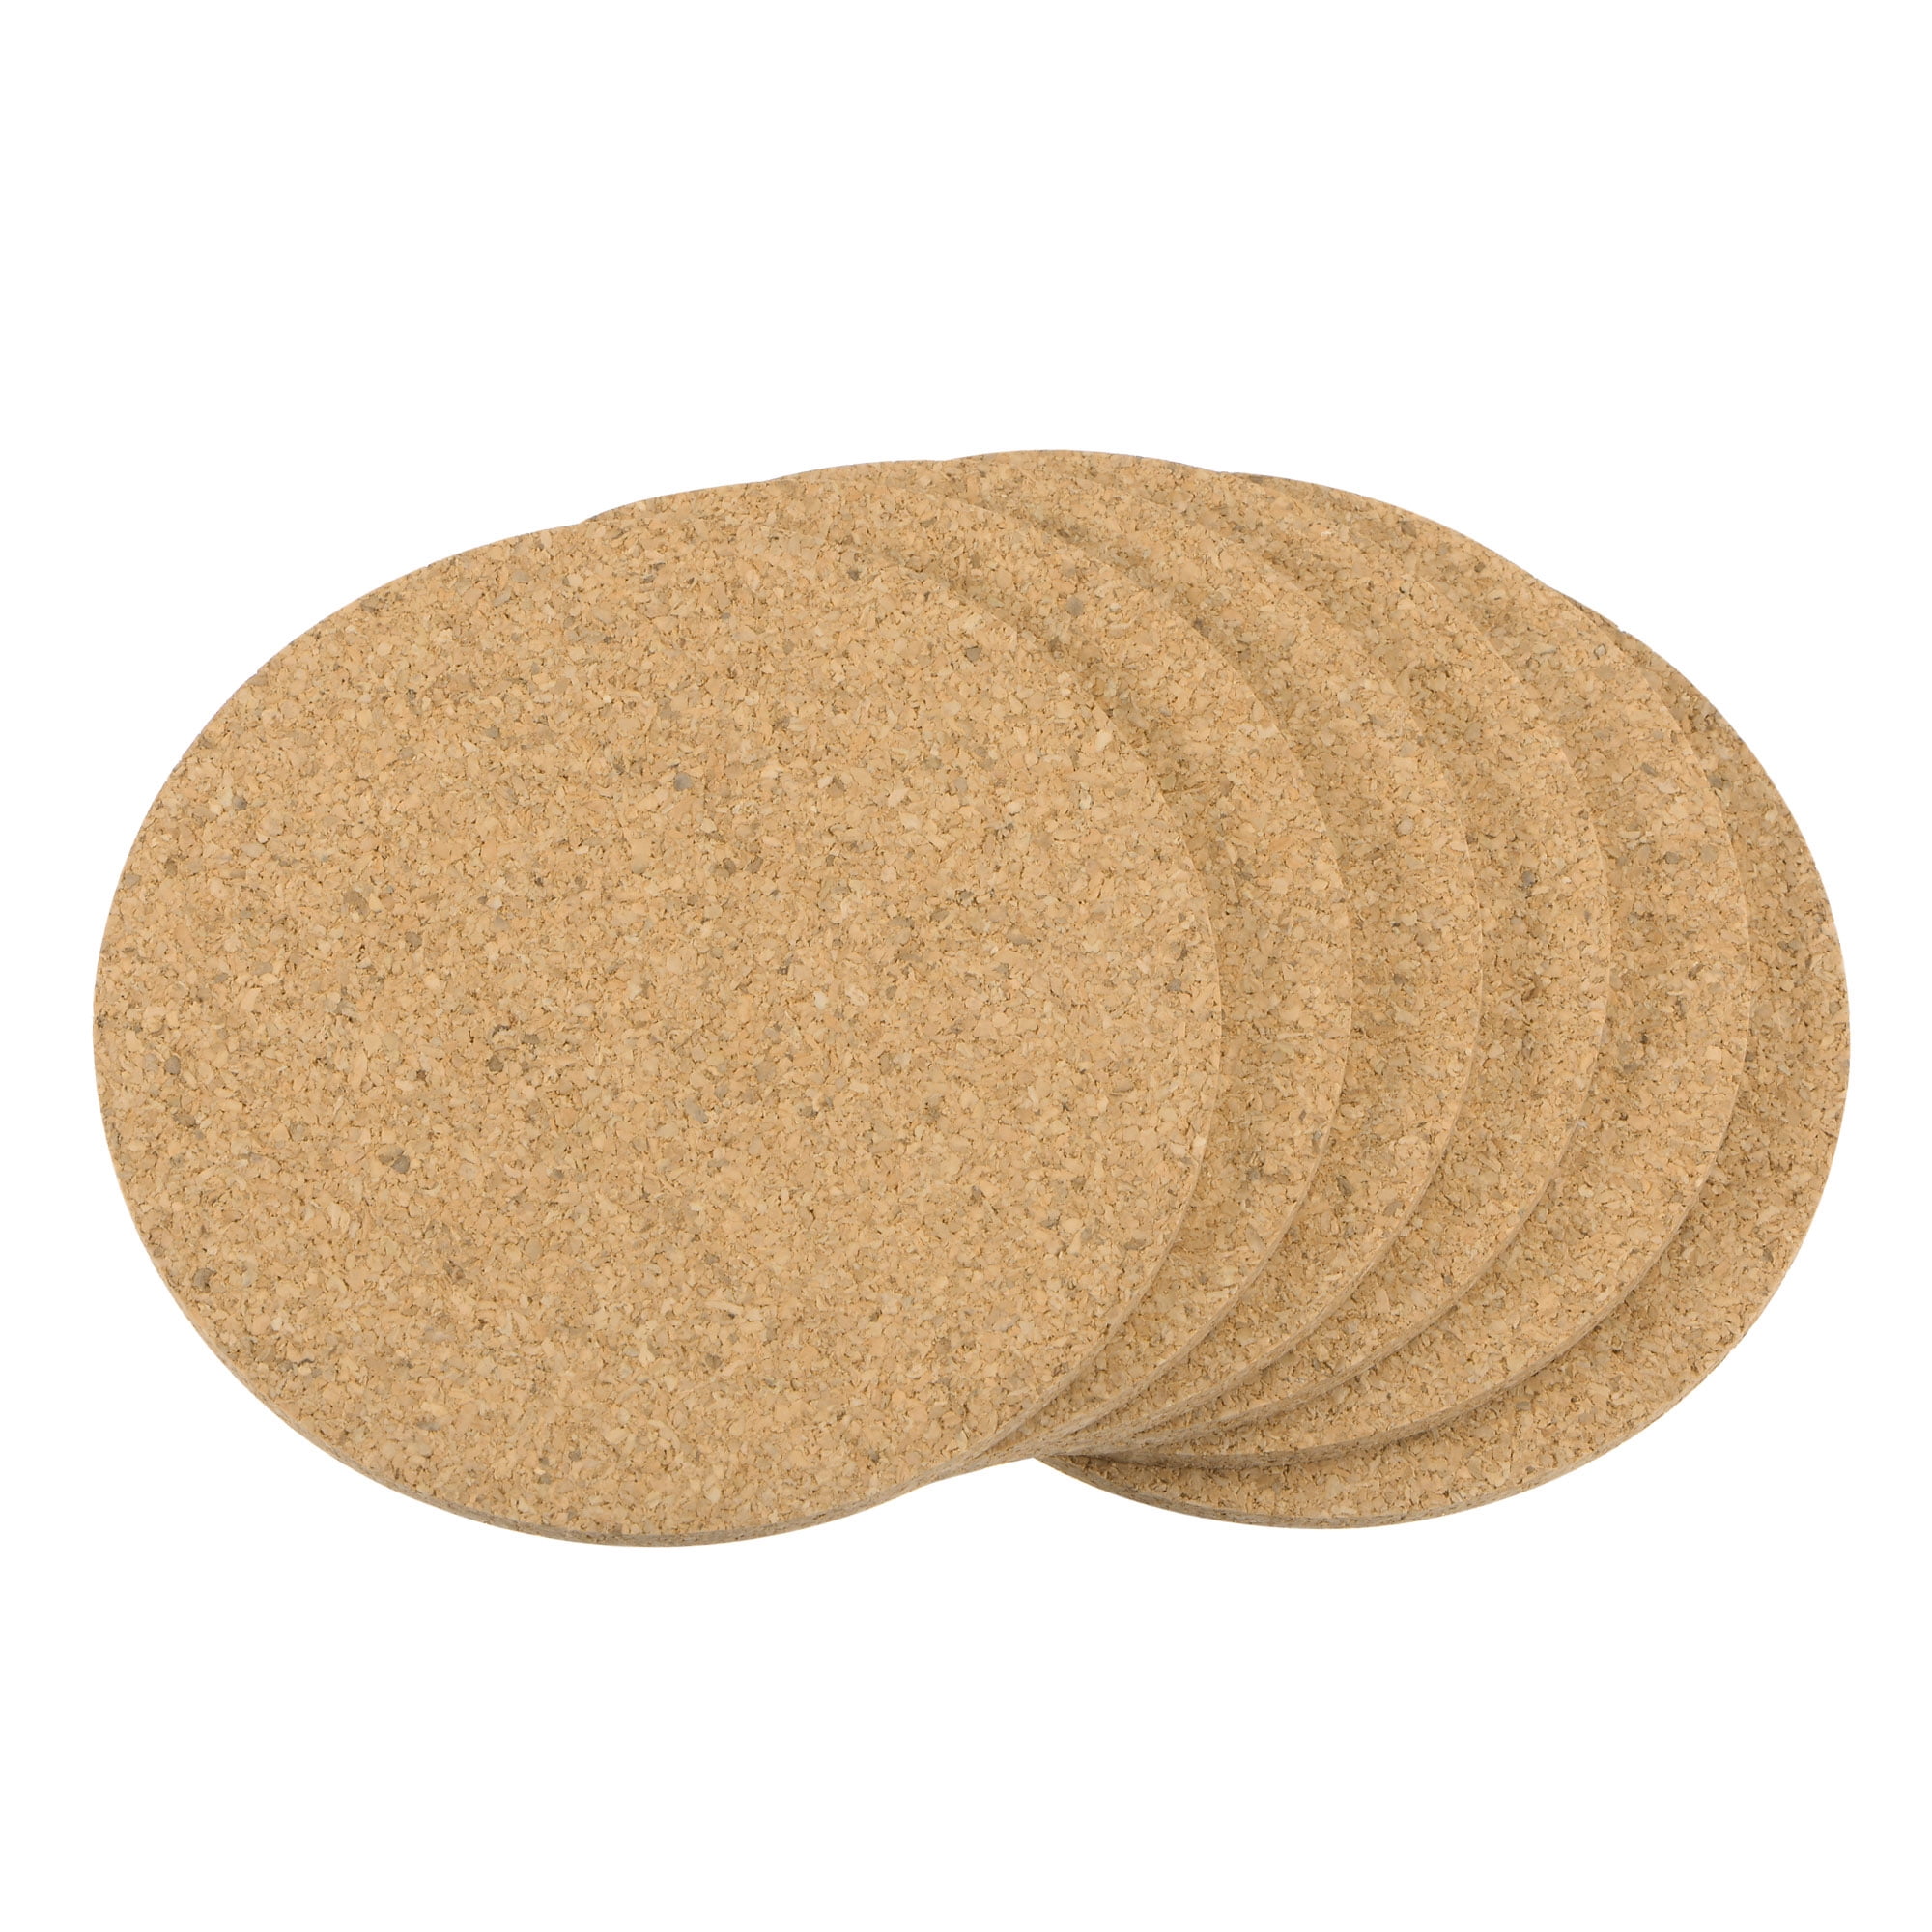 Wholesale 3.5-in. Round Cork Coaster | Coasters | Order Blank